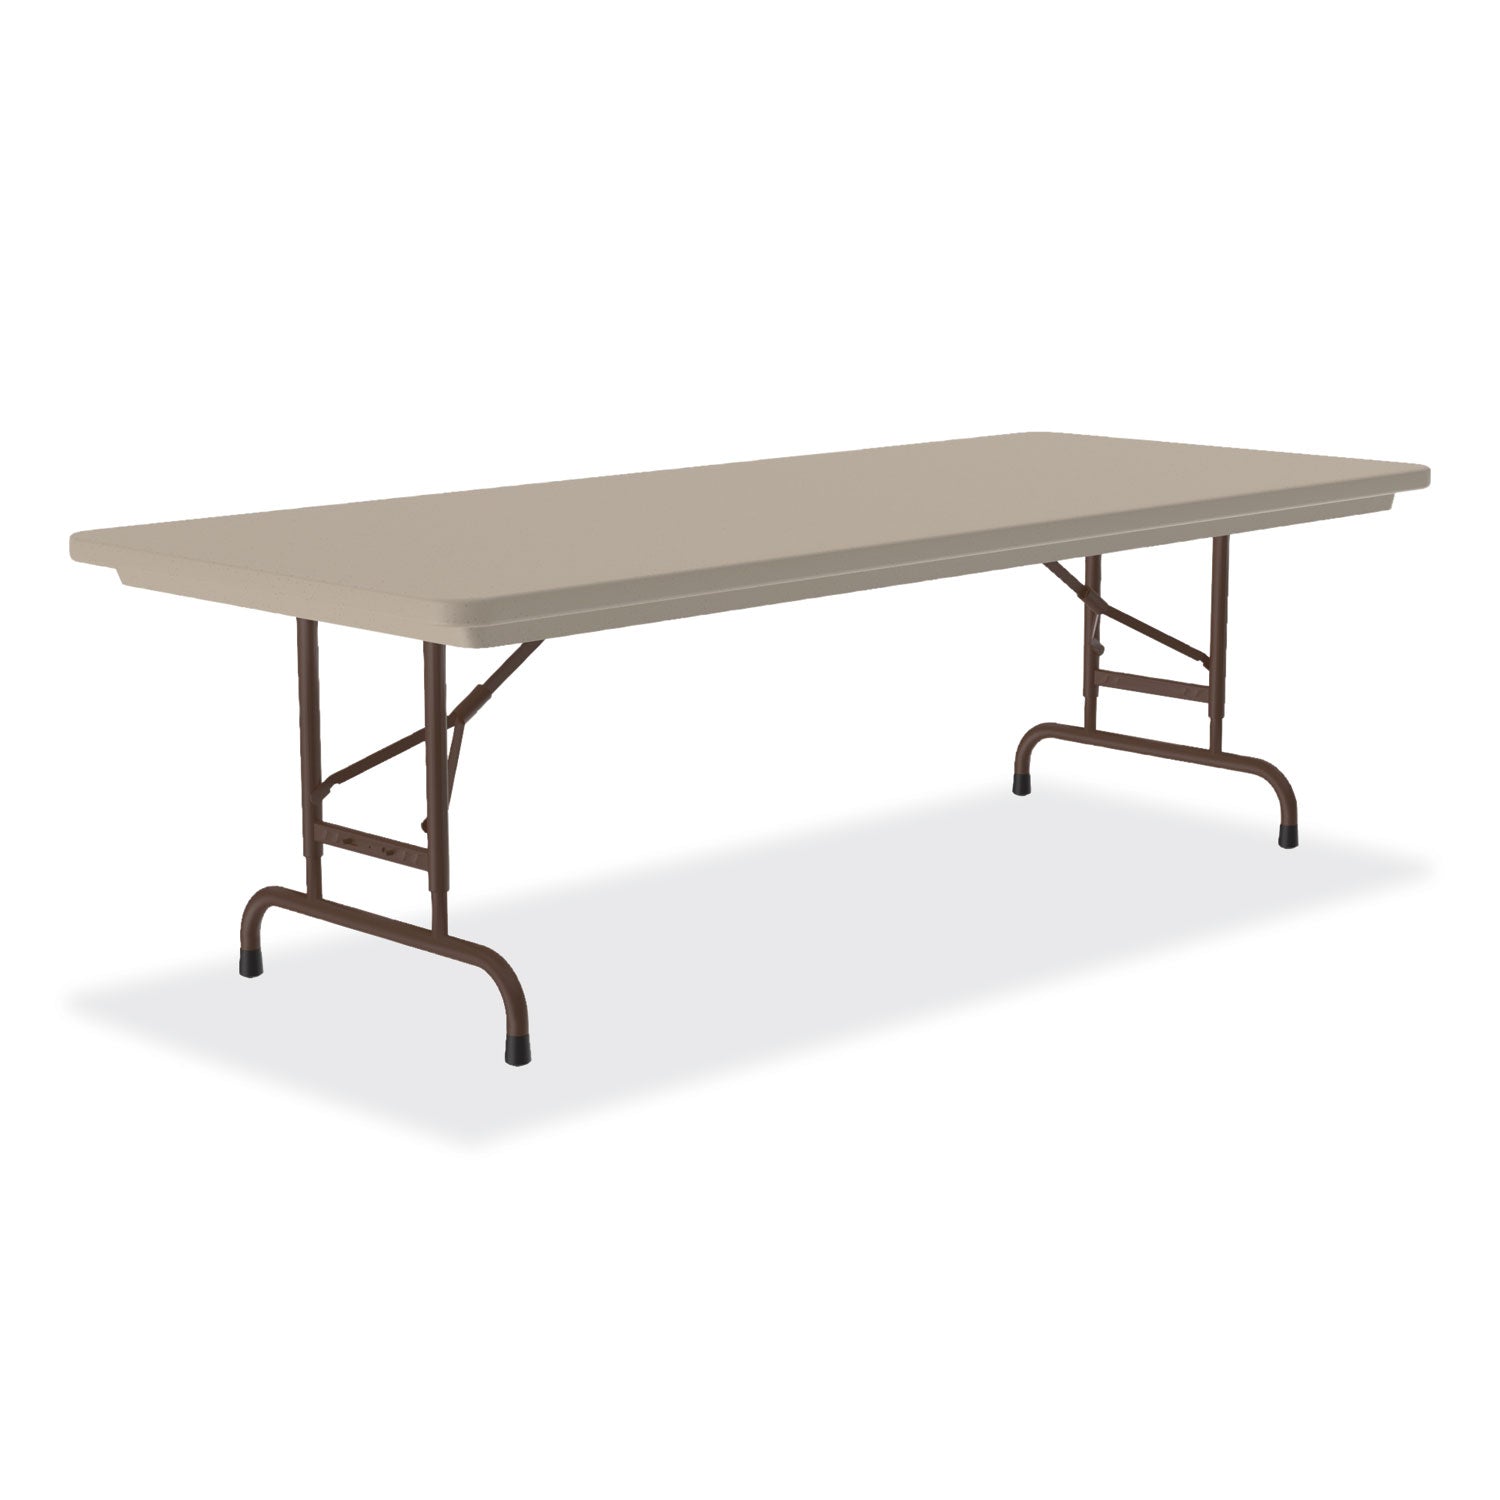 adjustable-folding-tables-rectangular-72-x-30-x-22-to-32-mocha-top-brown-legs-4-pallet-ships-in-4-6-business-days_crlra3072244p - 5